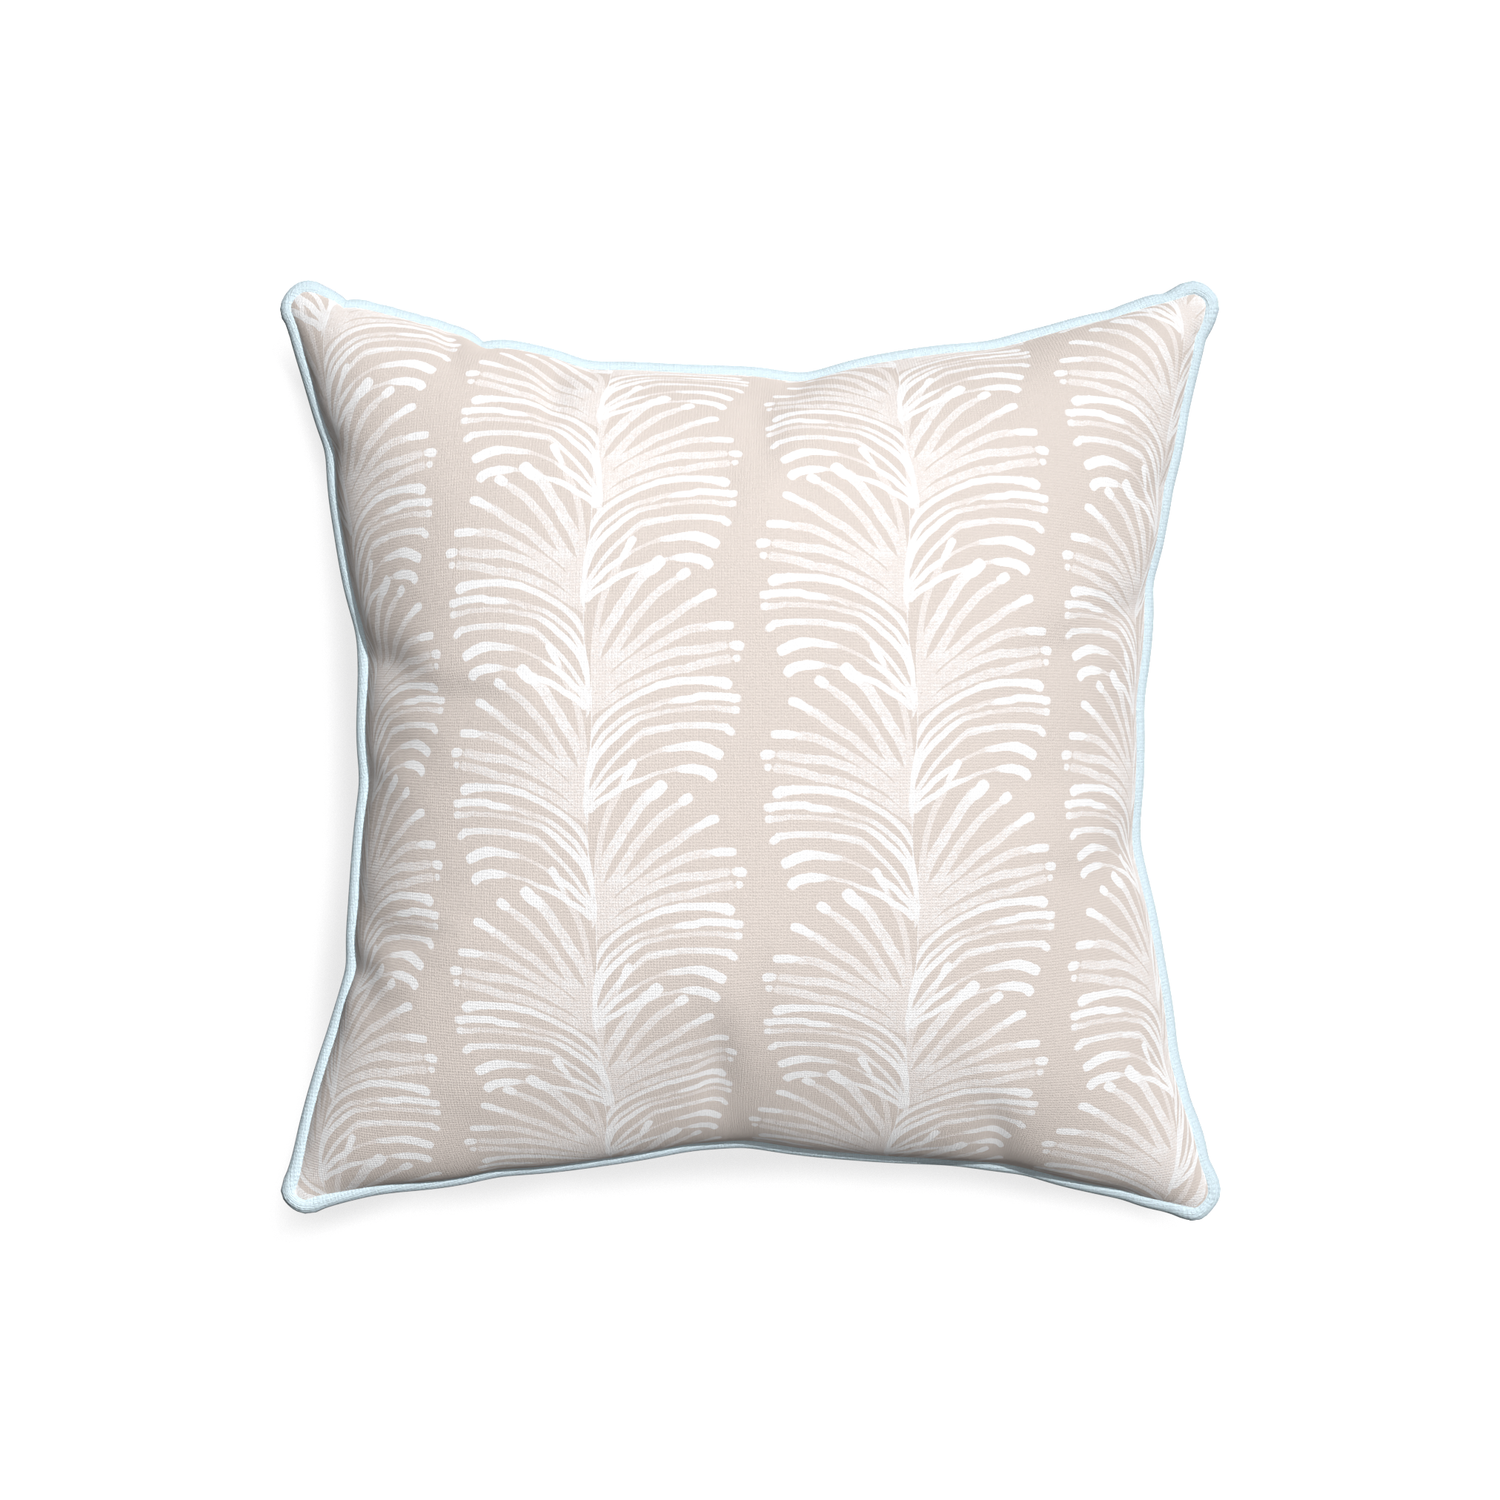 20-square emma sand custom pillow with powder piping on white background